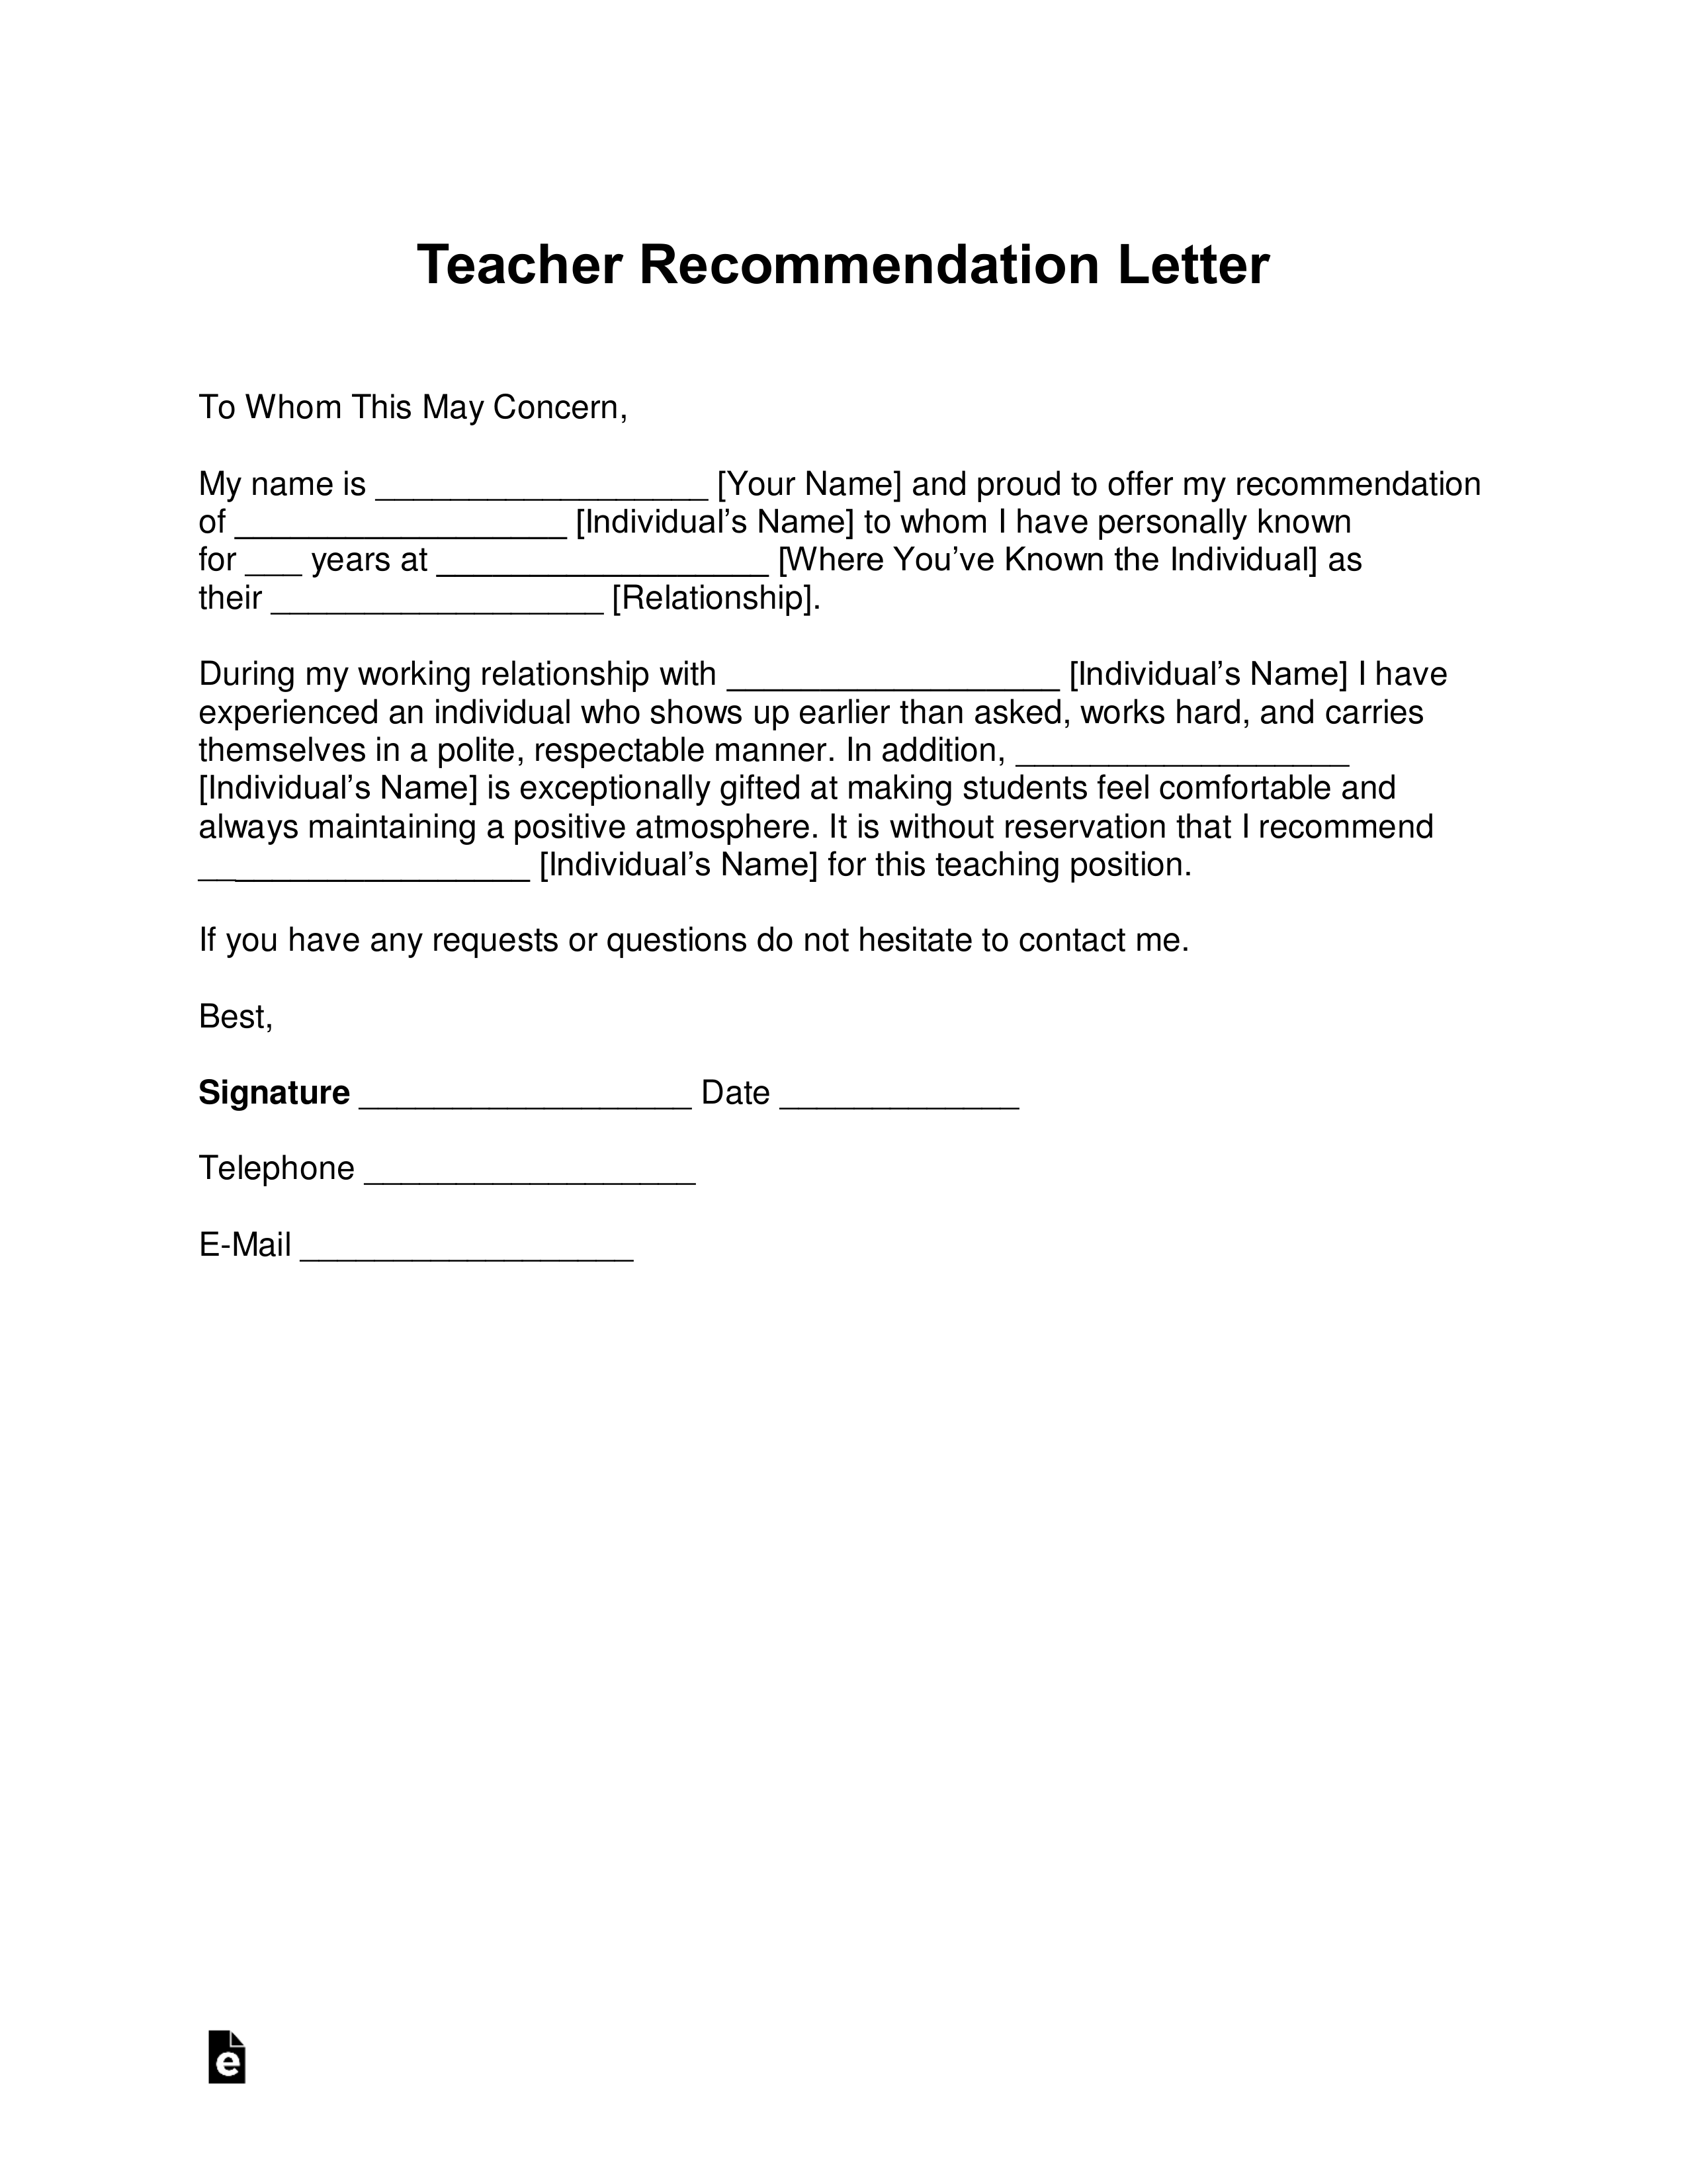 Letter Of Recommendation For Student Template from eforms.com